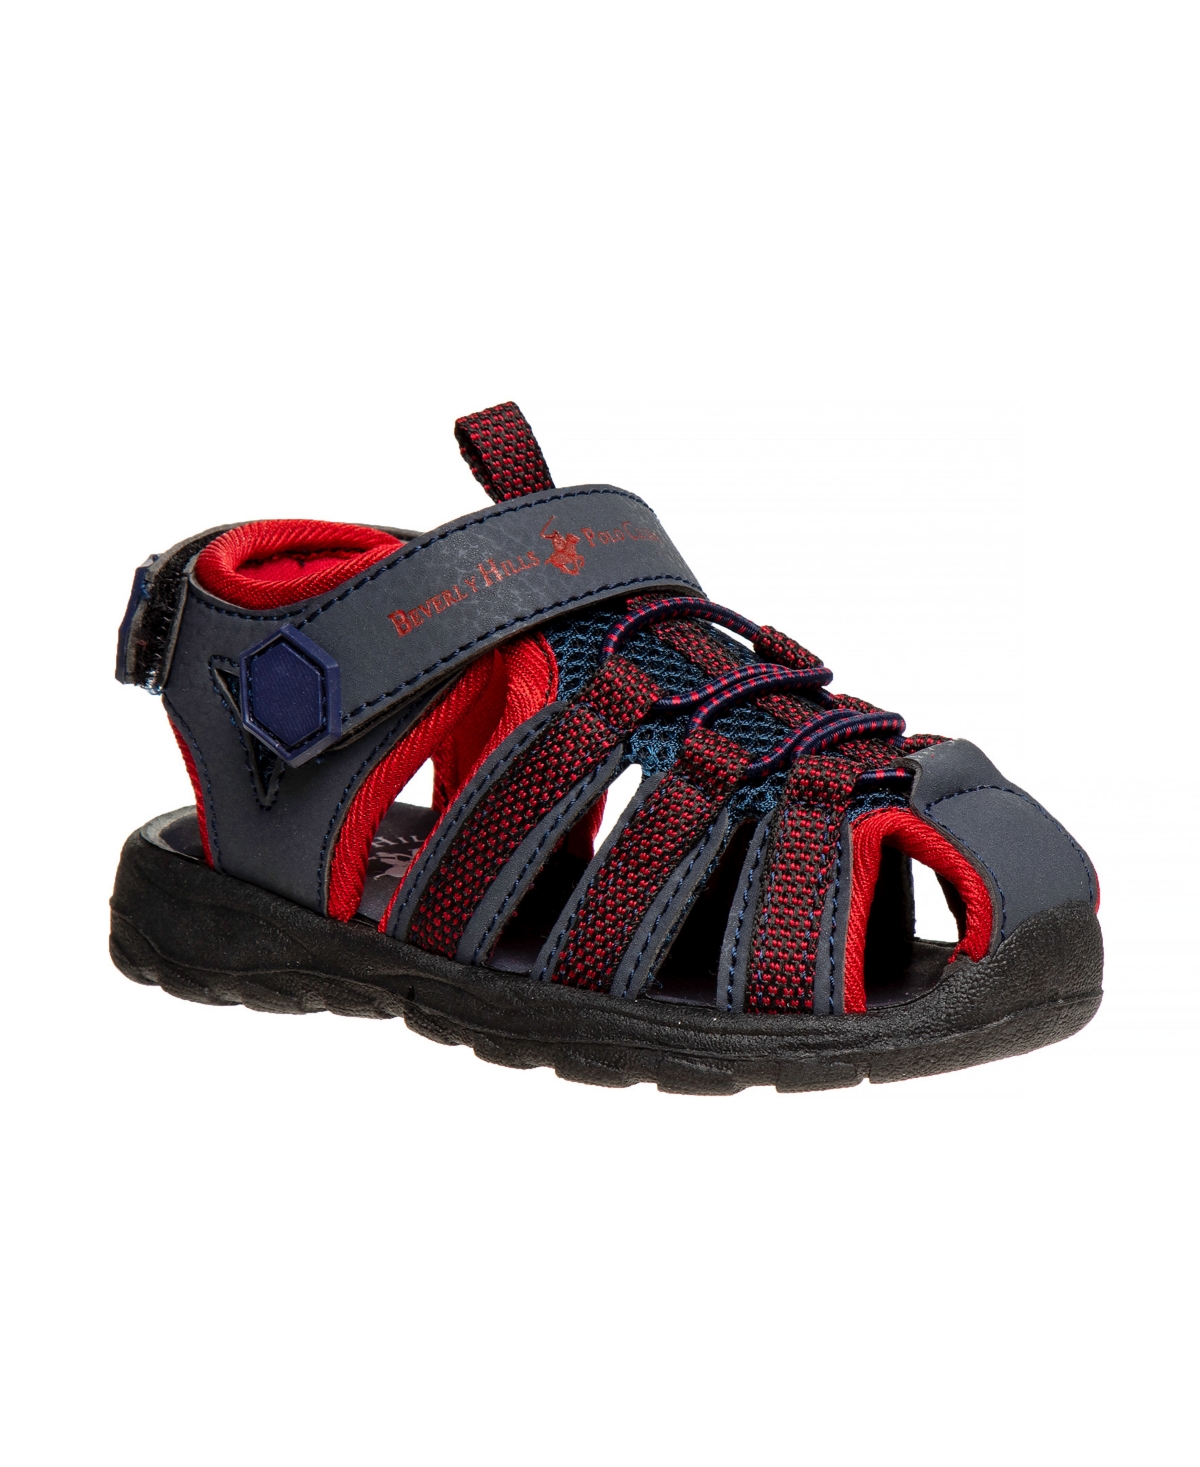 Beverly Hills Polo Club Babies' Toddler Hook And Loop Sandals In Multi